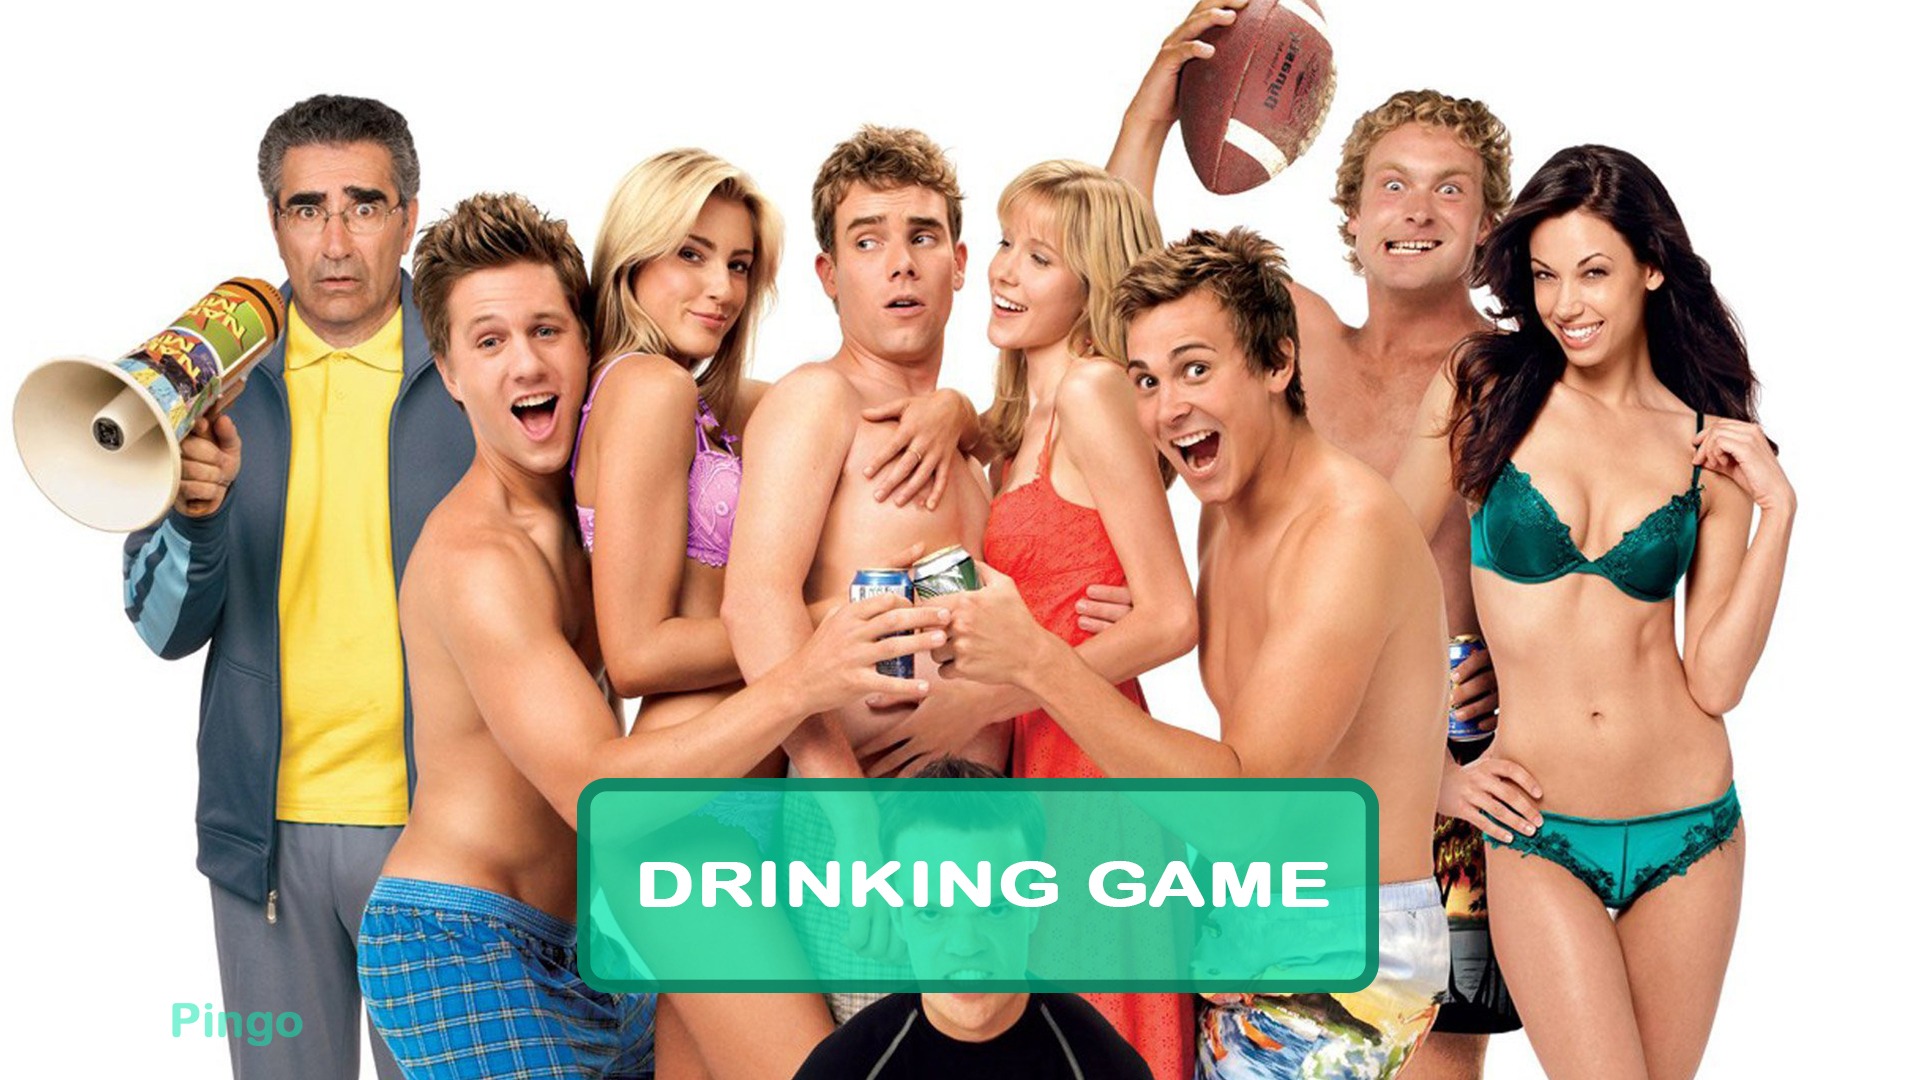 American Pie Presents - The Naked Mile Drinking Game